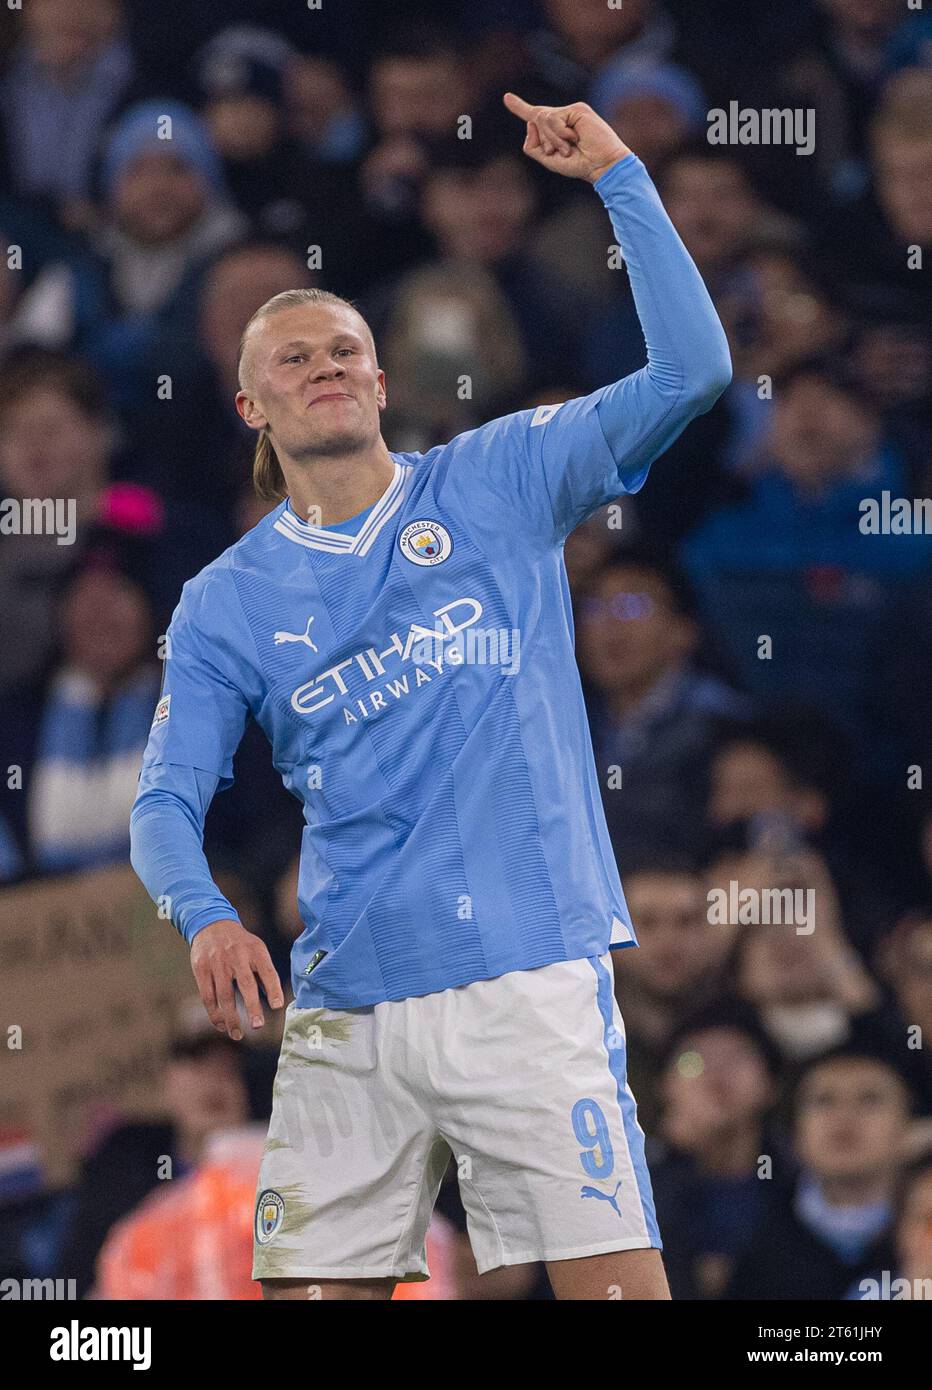 Manchester, UK. 8th Nov, 2023. Manchester City's Erling Haaland celebrates after scoring during the UEFA Champions League Group G match between Manchester City FC and BSC Young Boys in Manchester, Britain, on Nov. 7, 2023. Credit: Xinhua/Alamy Live News Stock Photo